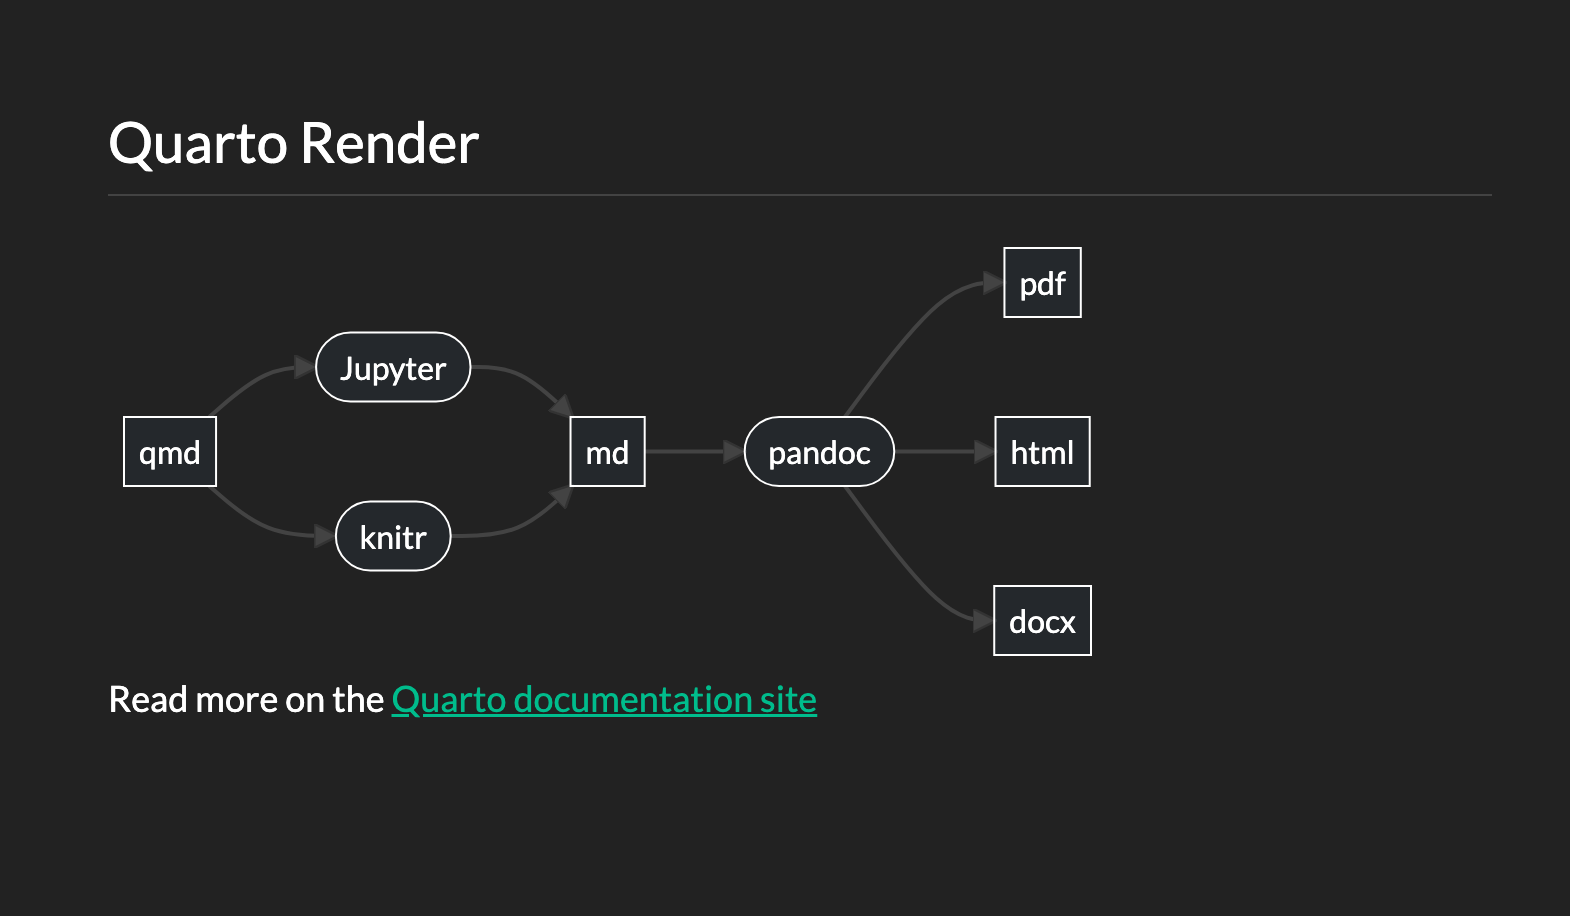 A screenshot of a Mermaid flowchart in a document using bootswatch's Darkly theme.